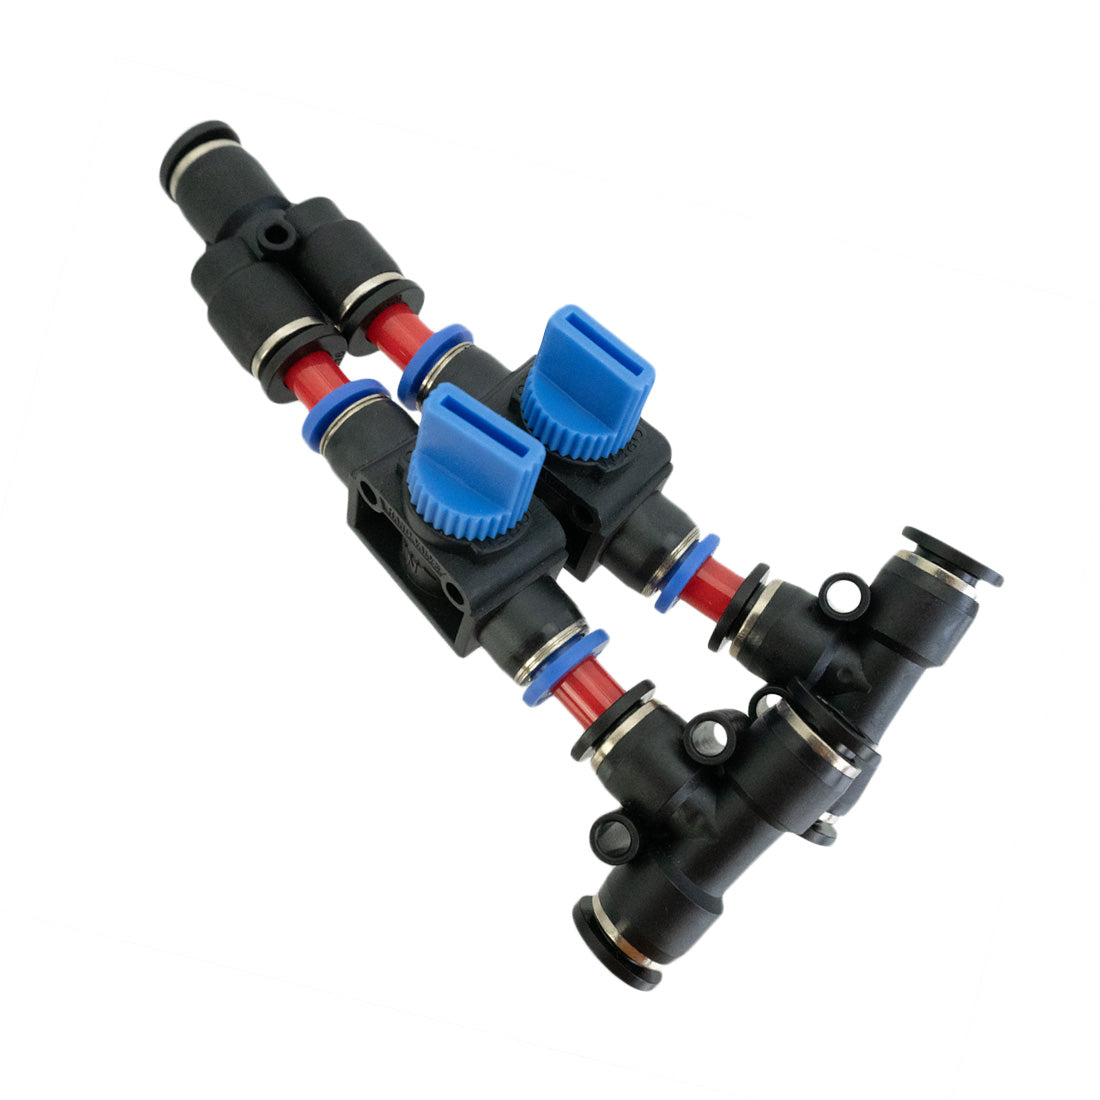 XERO Dual Valve Assembly Product View